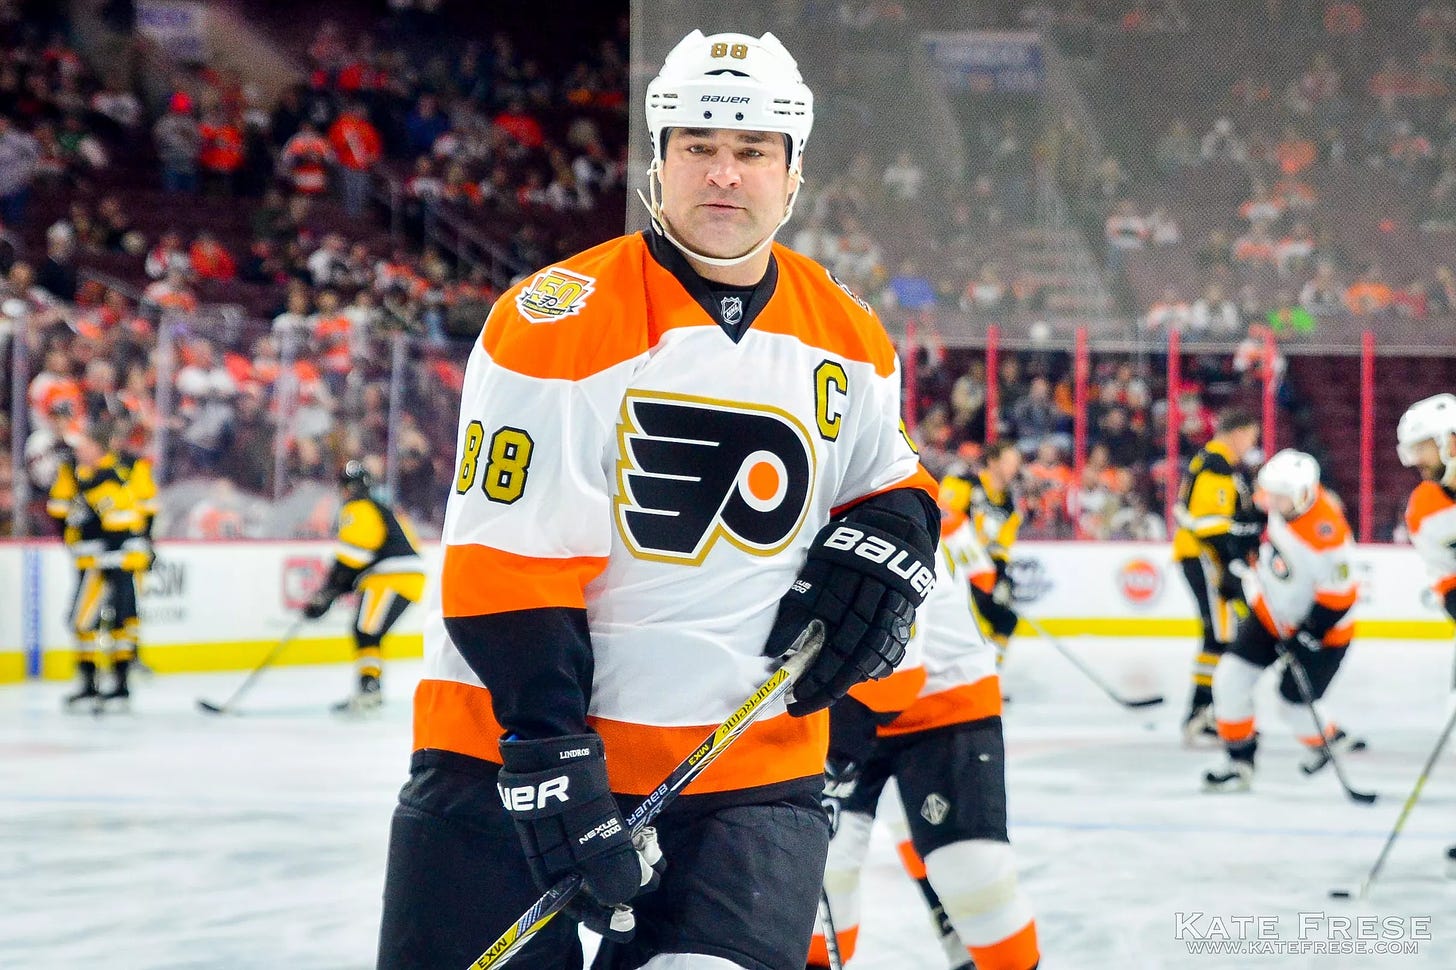 A look back on the acting career of Eric Lindros